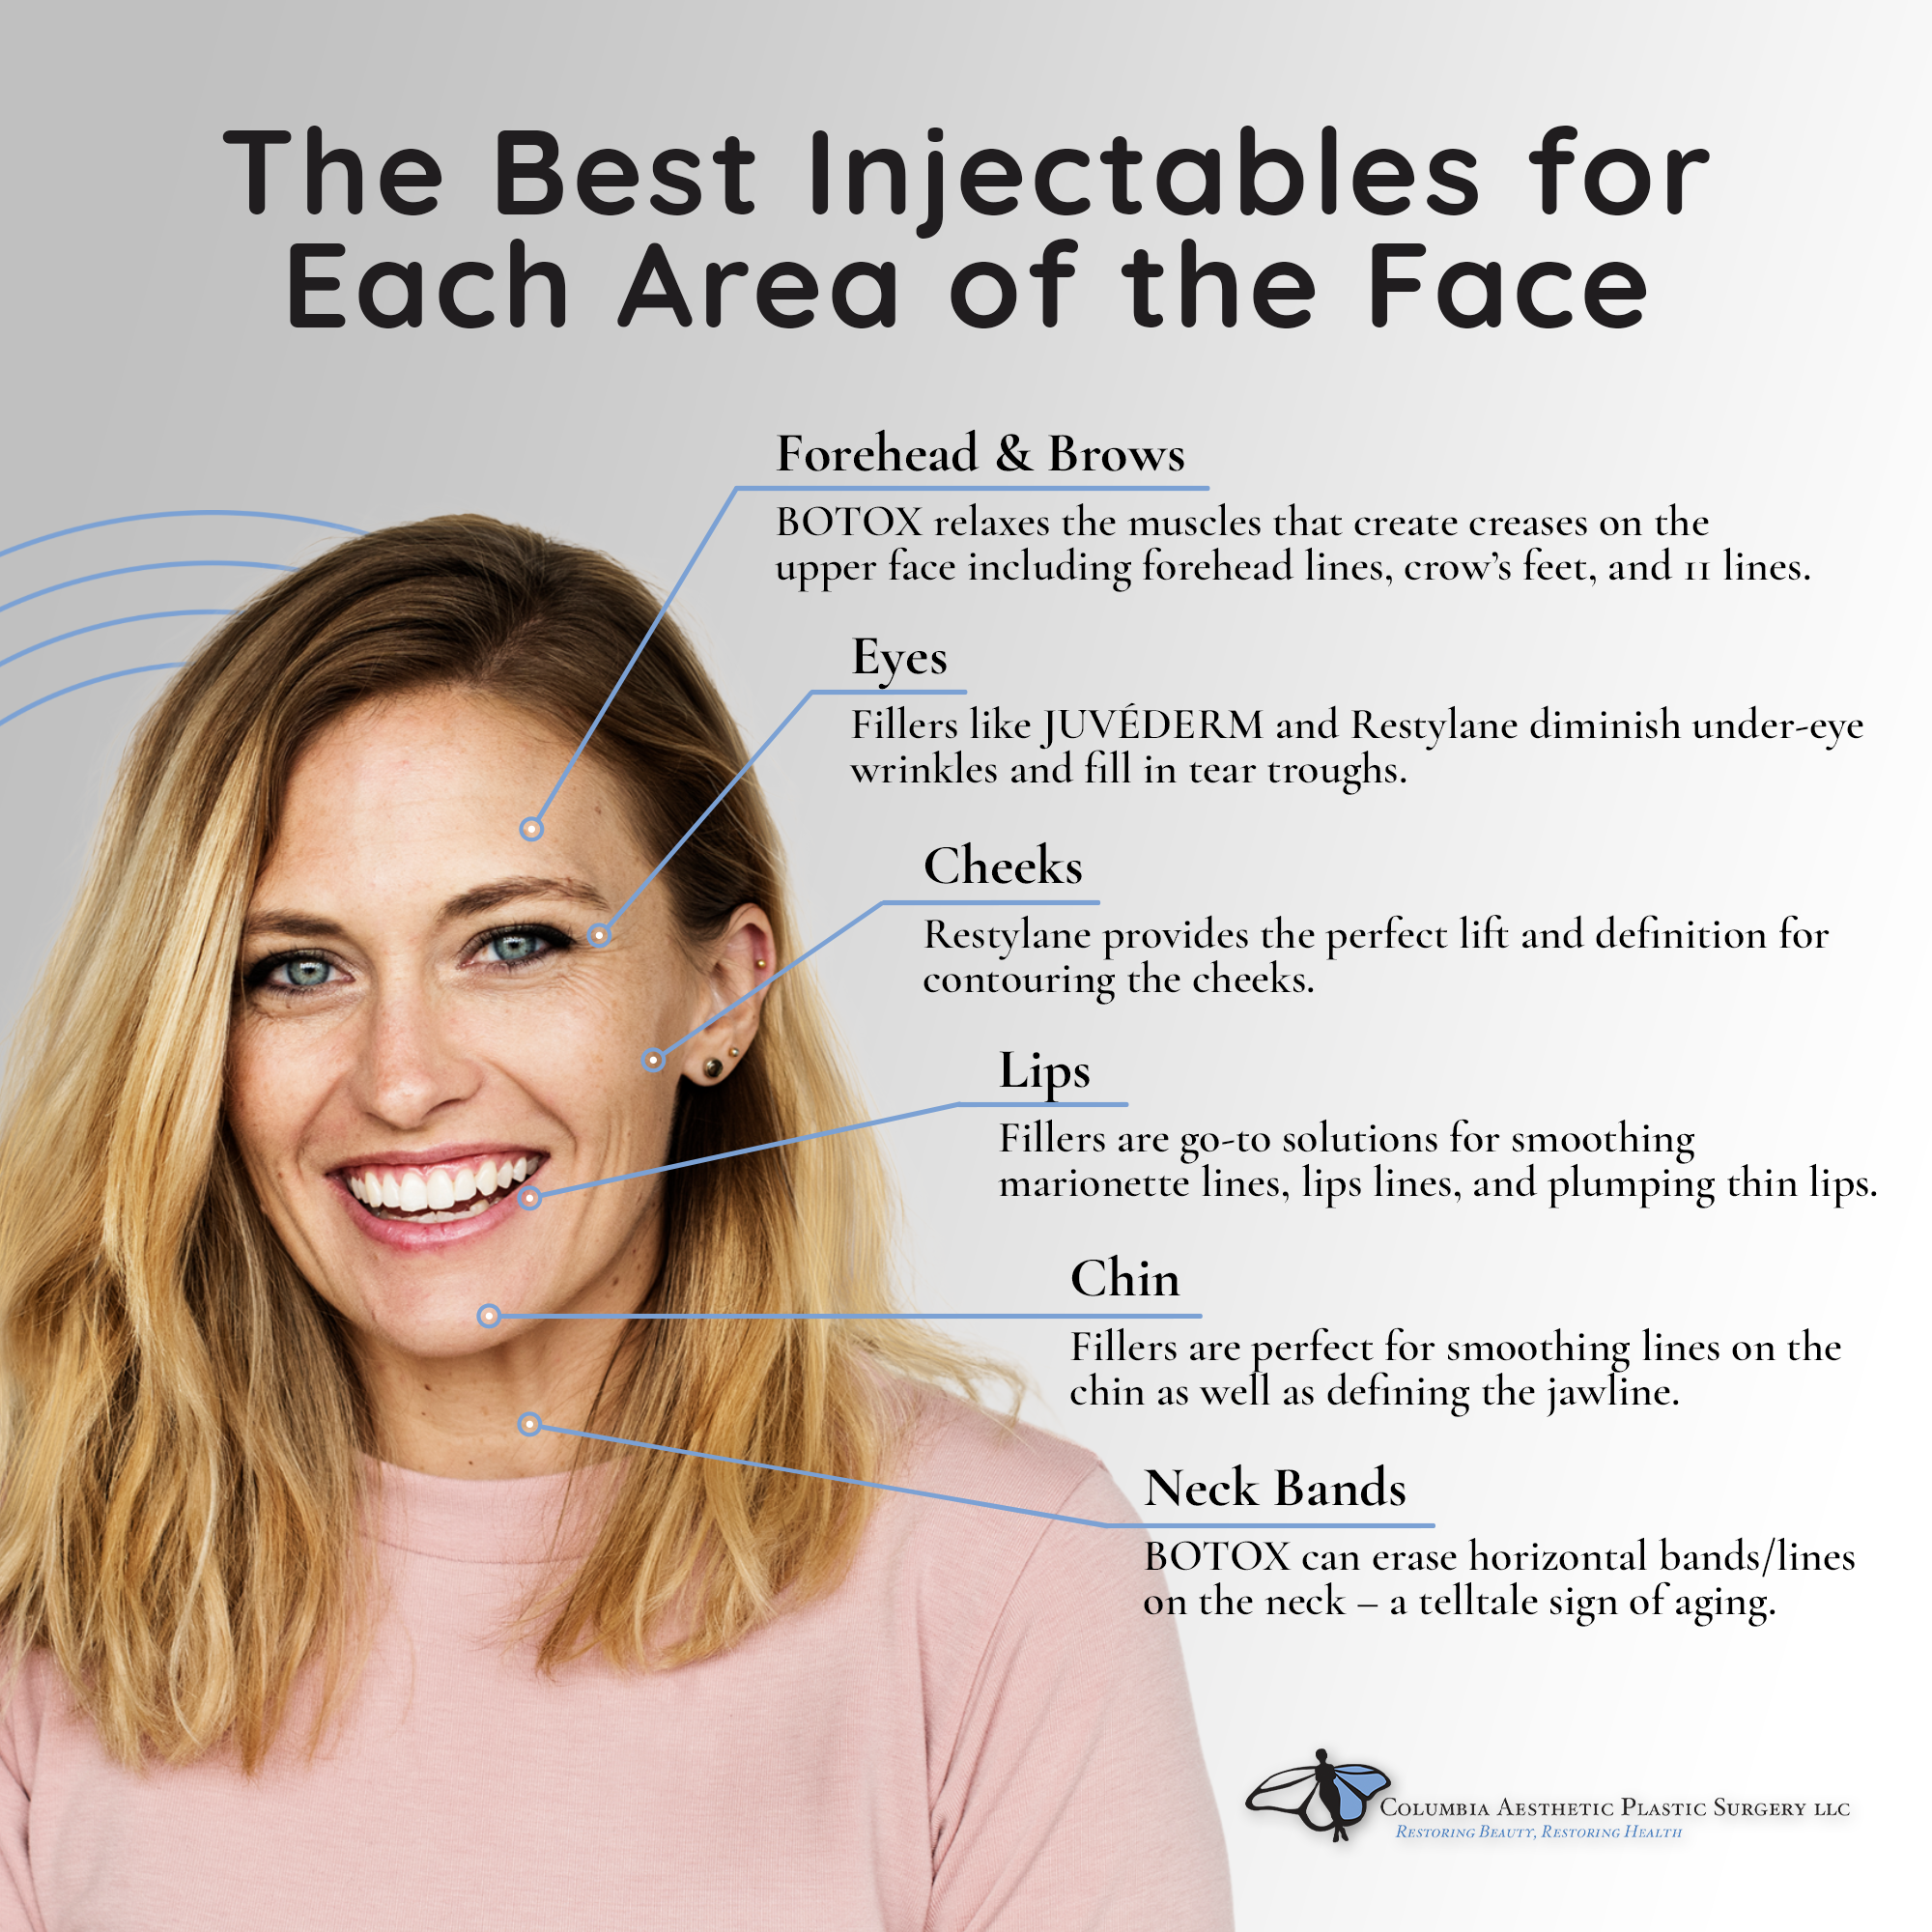 The Best Injectables for Each Area of the Face